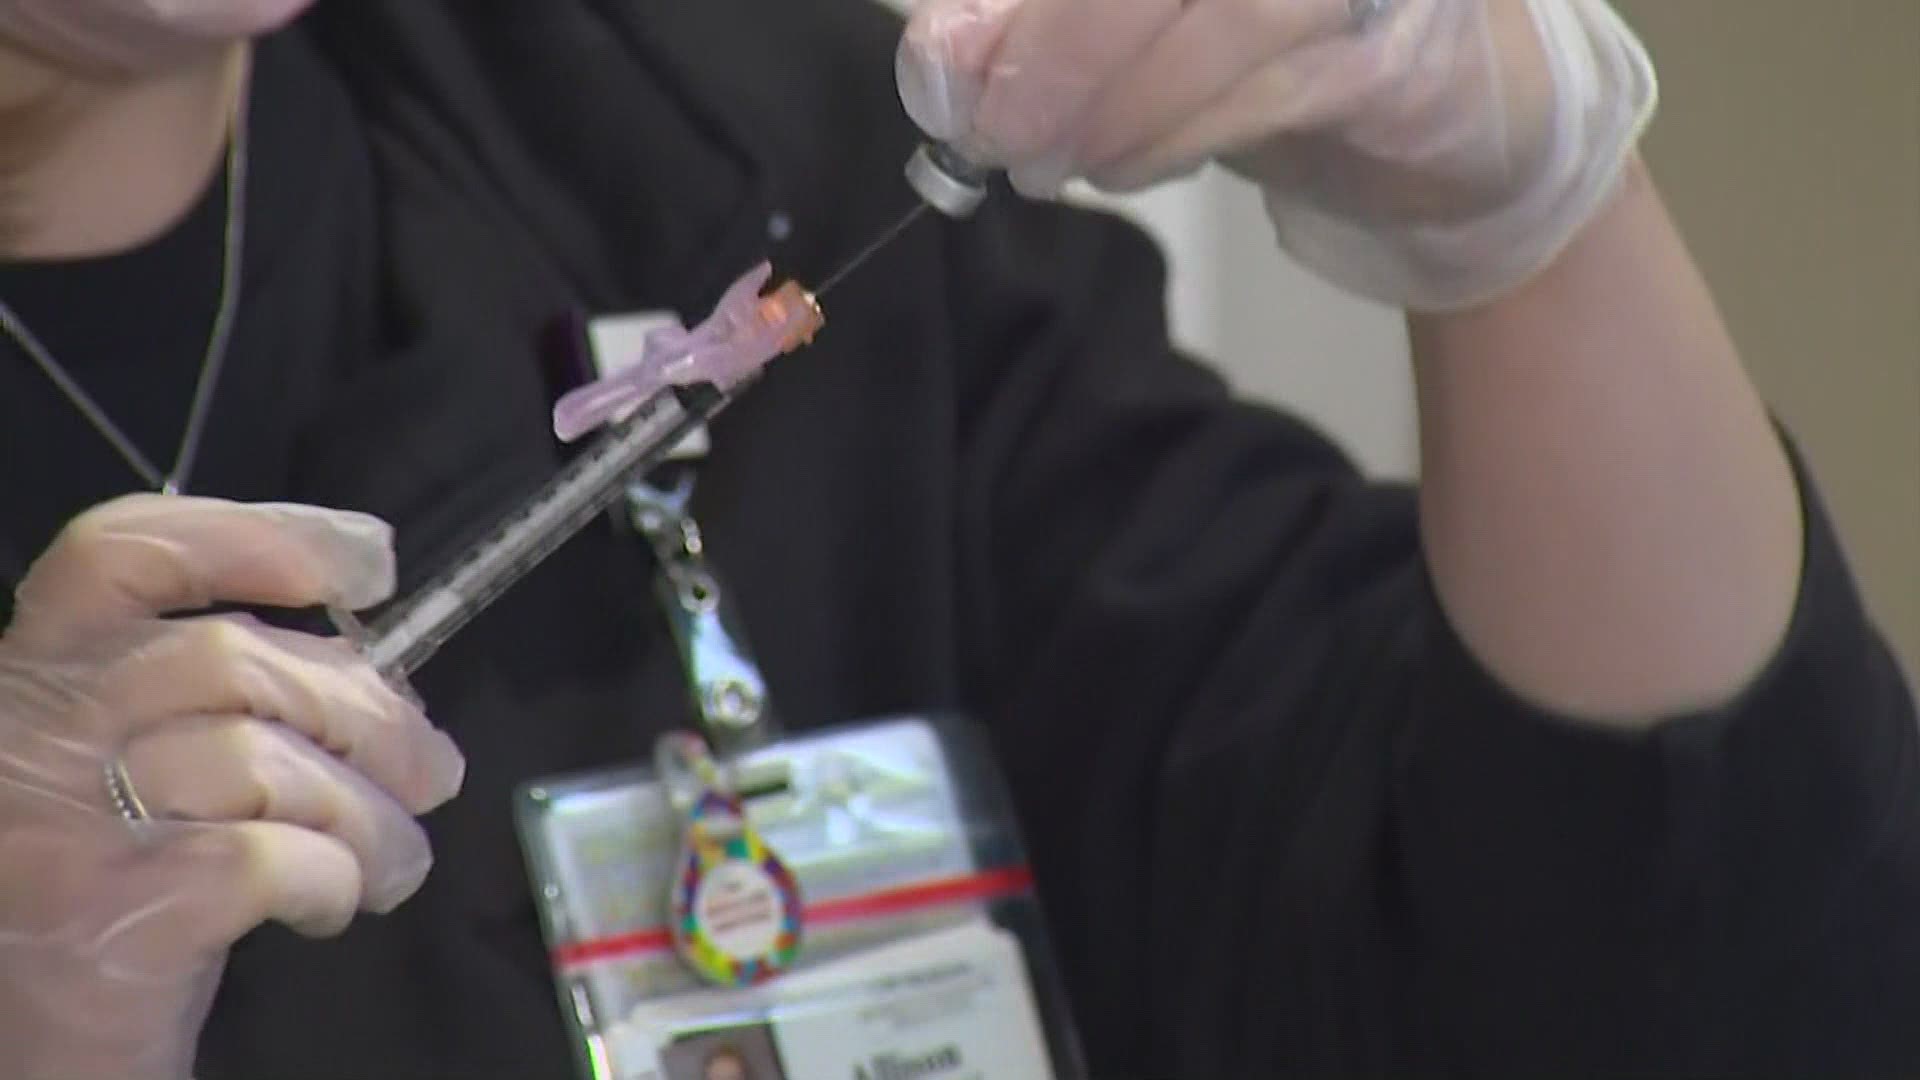 The vaccination rate in Pierce County remains low despite Washington state hitting the 70% vaccination goal.